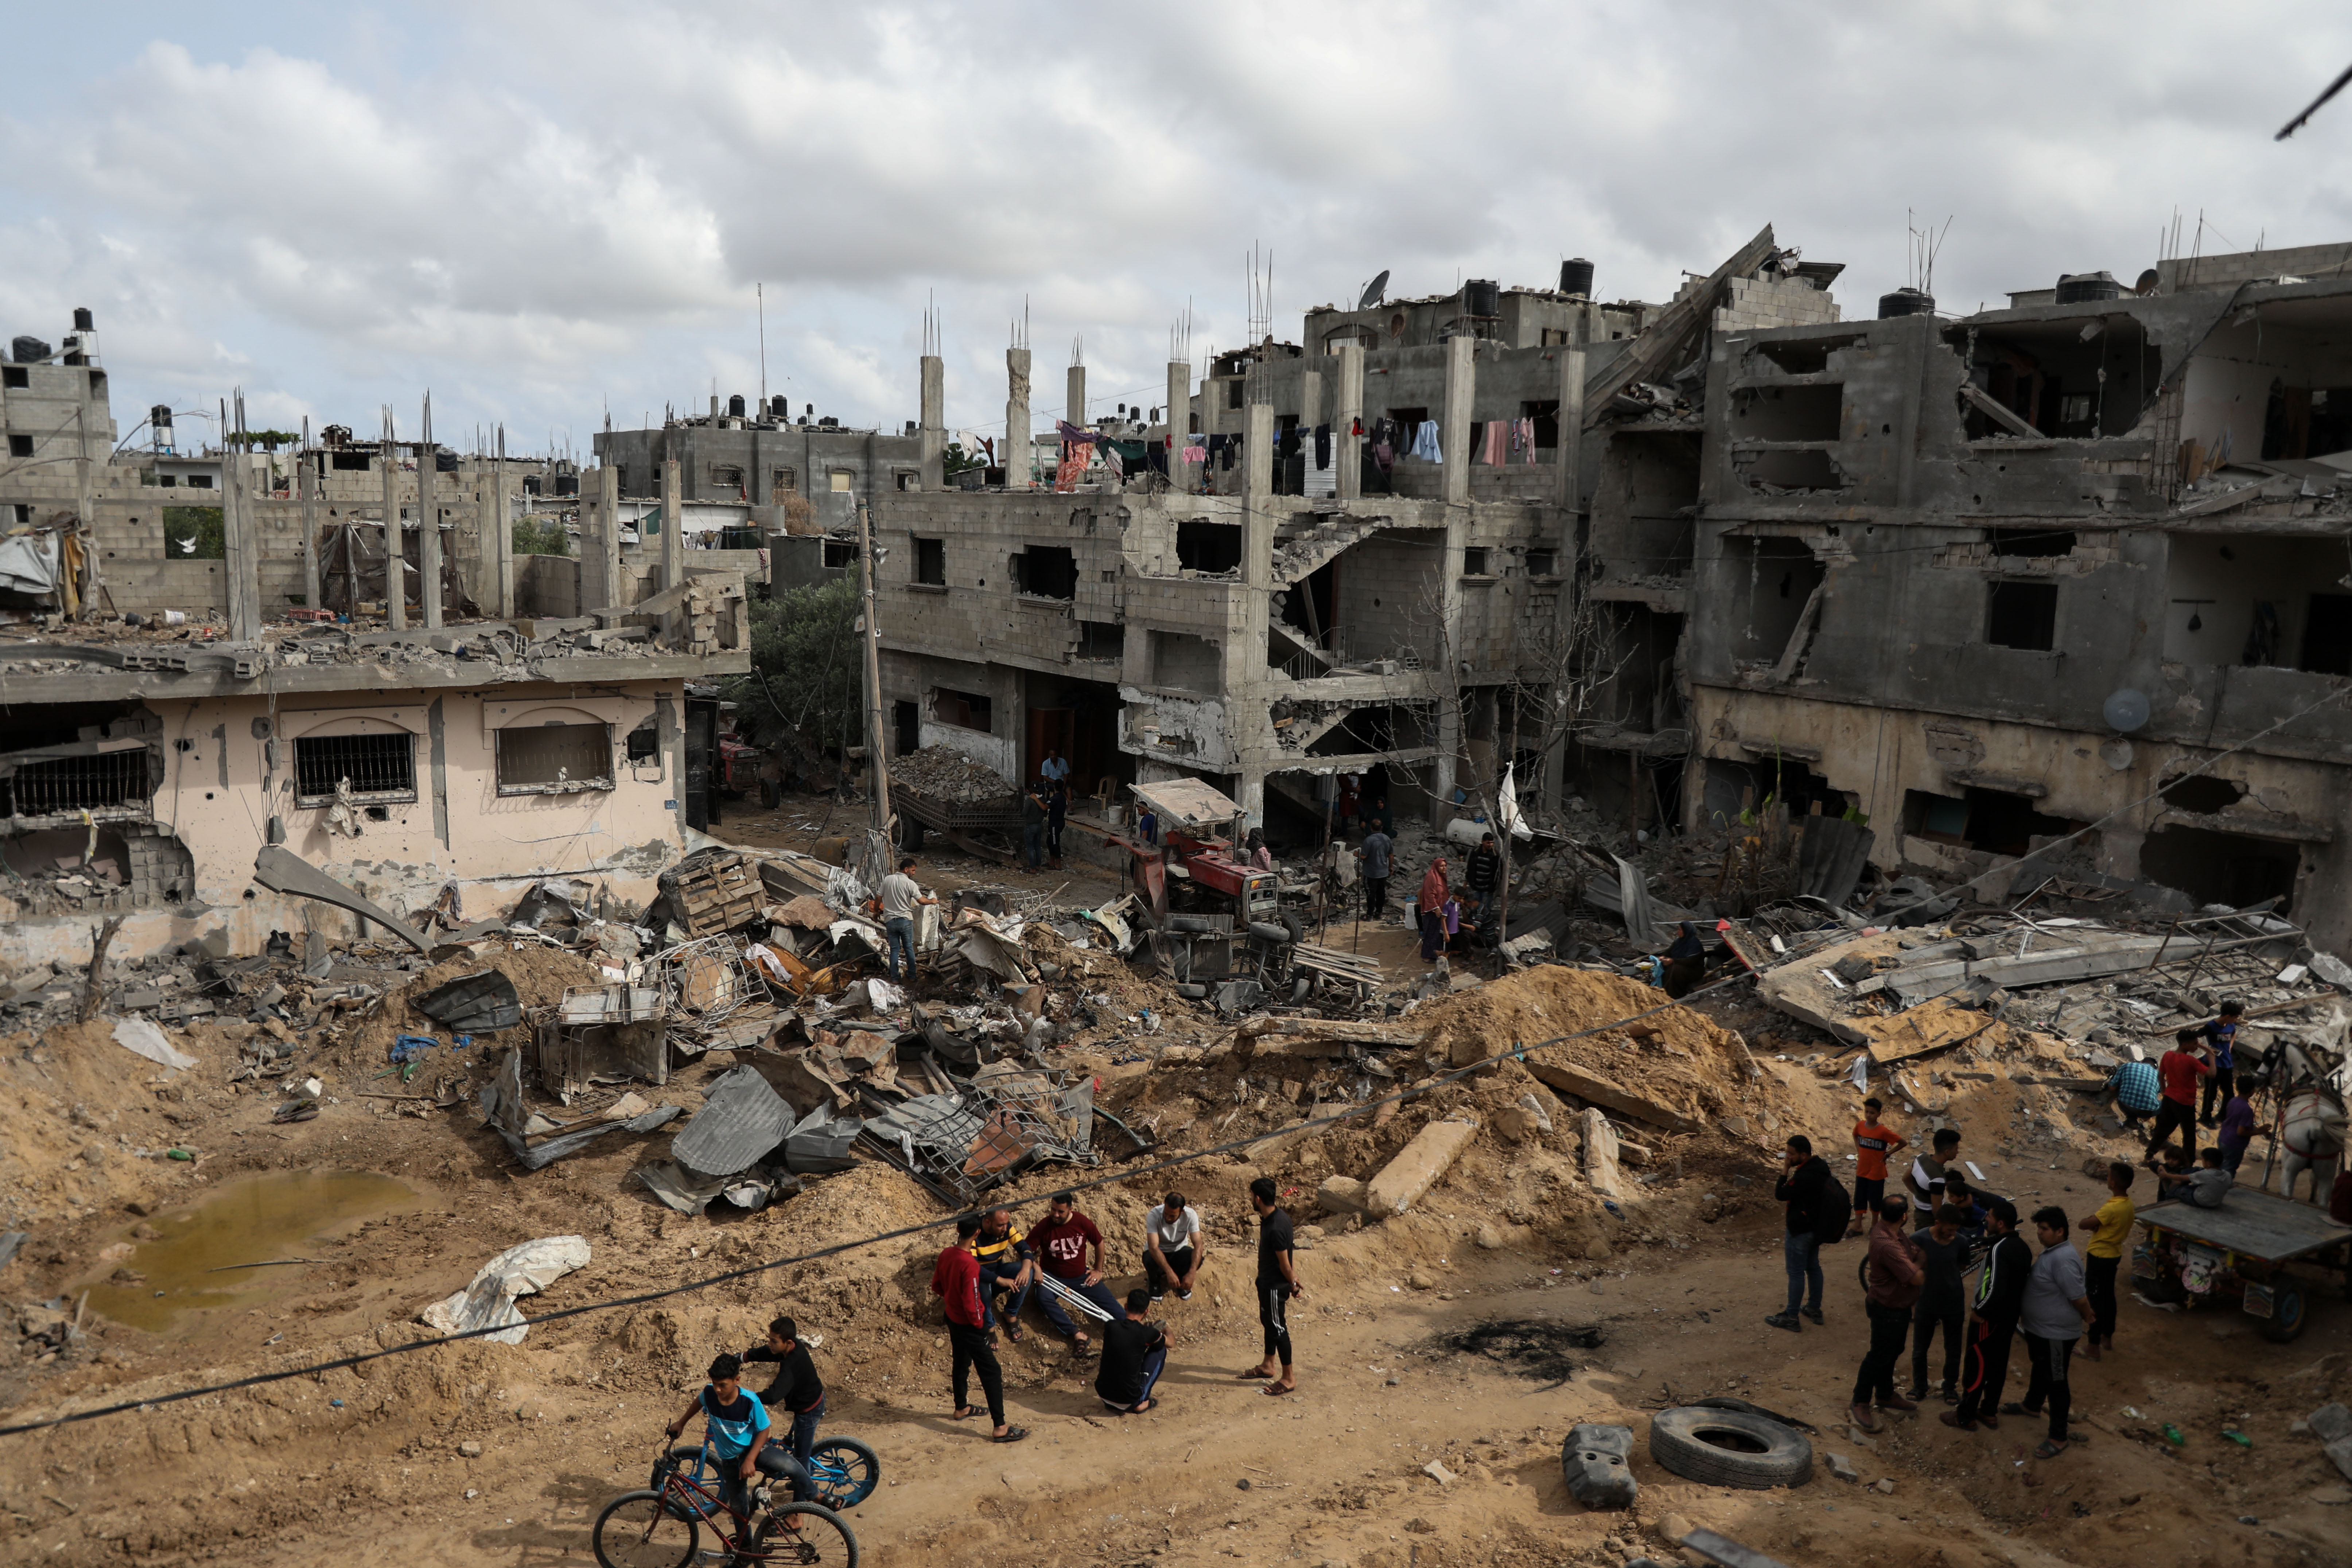 United Nations Secretary-General Antonio Guterres has called on the international community to unite in providing assistance to reconstruction efforts in Gaza